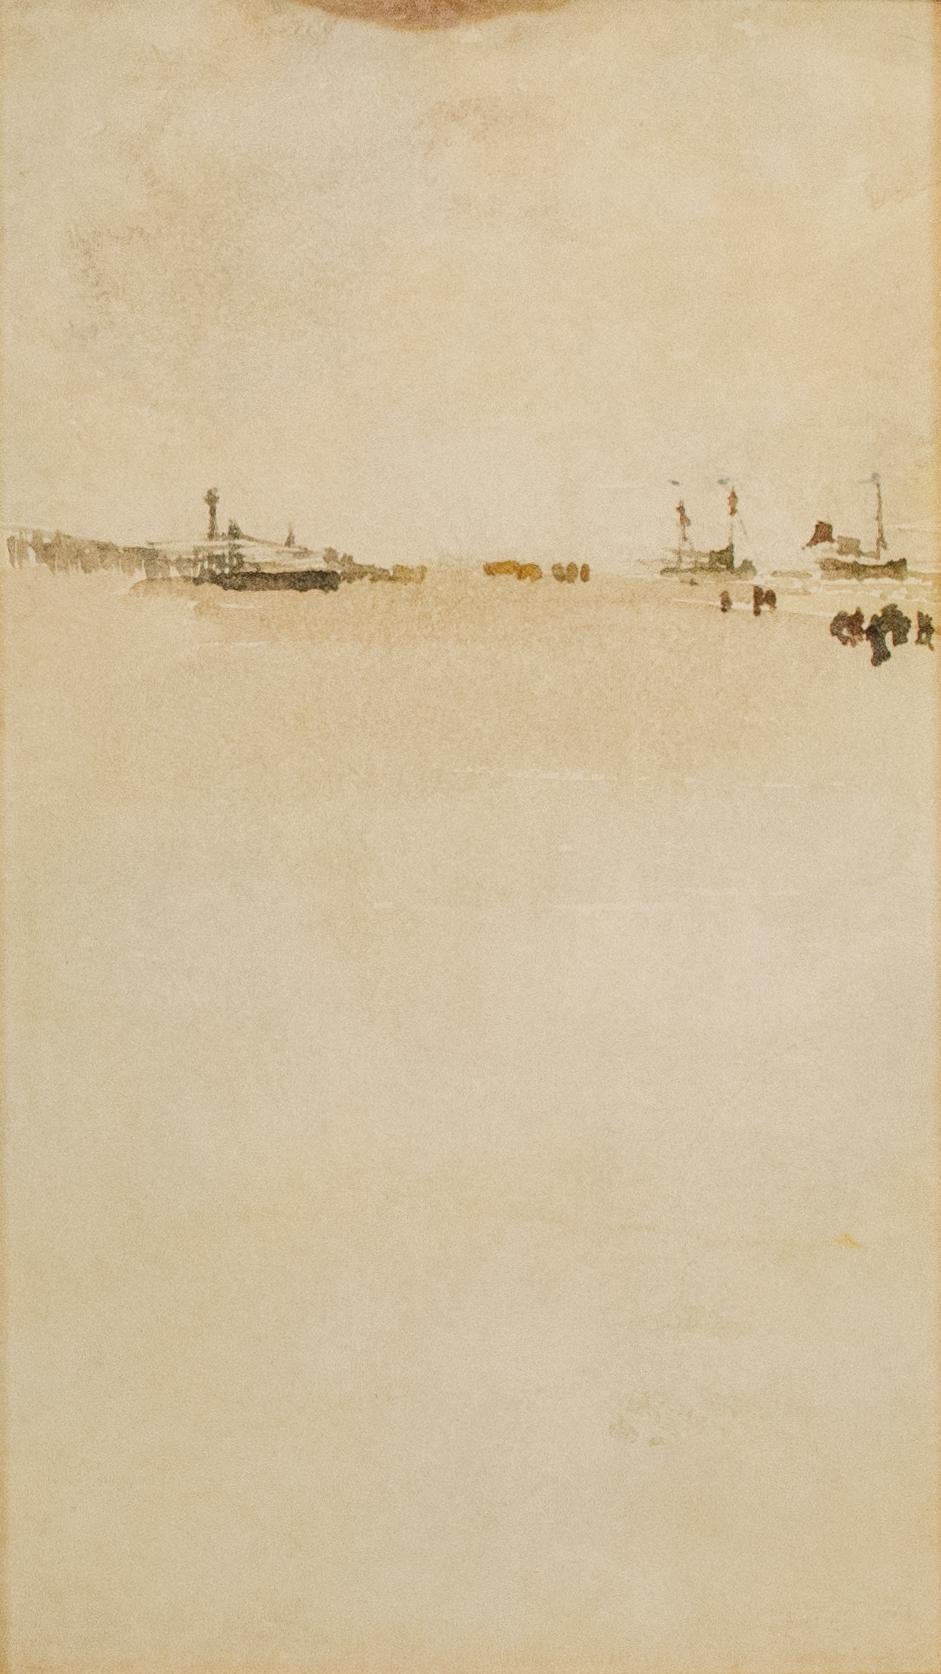 What is James Abbott McNeill Whistler known for?